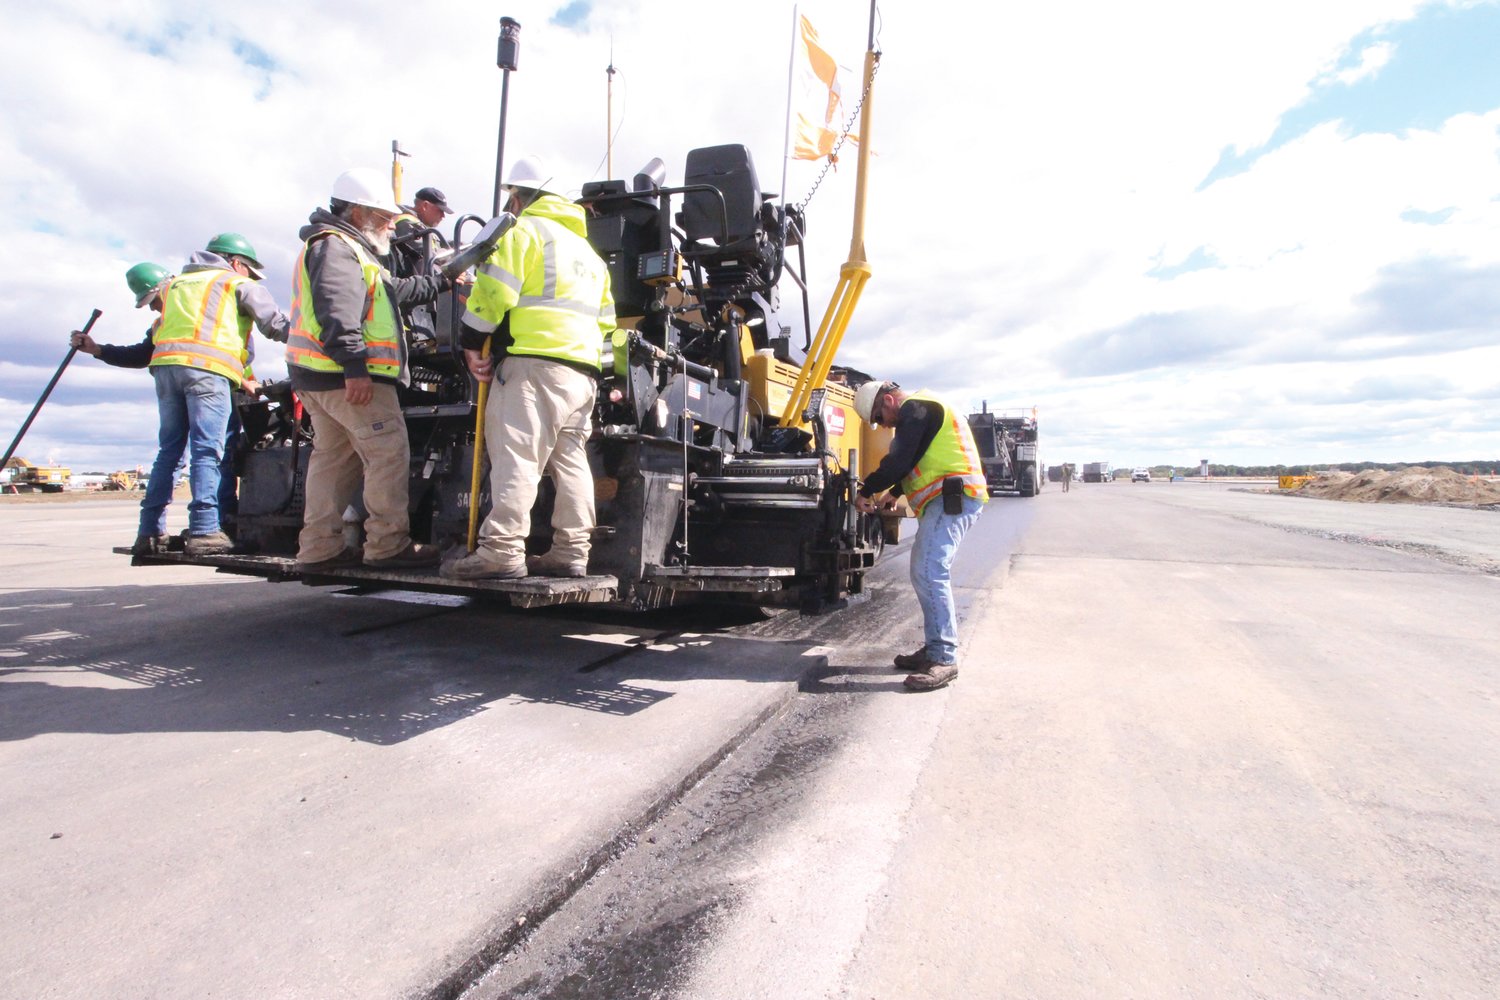 READY FOR ANOTHER LAYER: The Cardi Construction crew prepares to add another layer of asphalt to the crosswind runway.